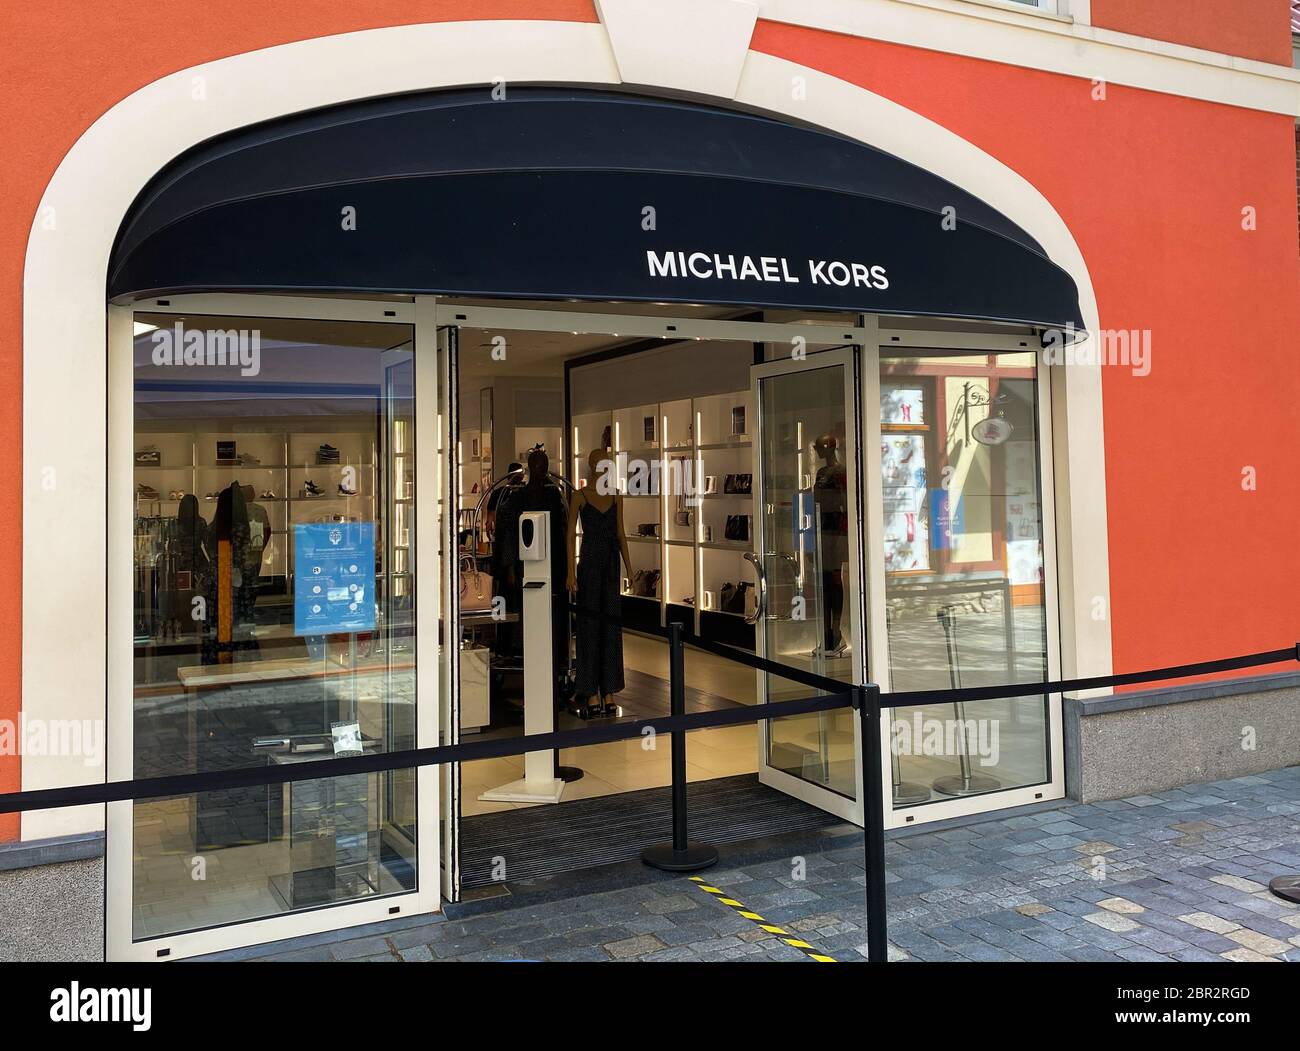 Roermond, Netherlands - May 19. 2020: View on facade with logo lettering of Michael  Kors fashion company at shop entrance Stock Photo - Alamy